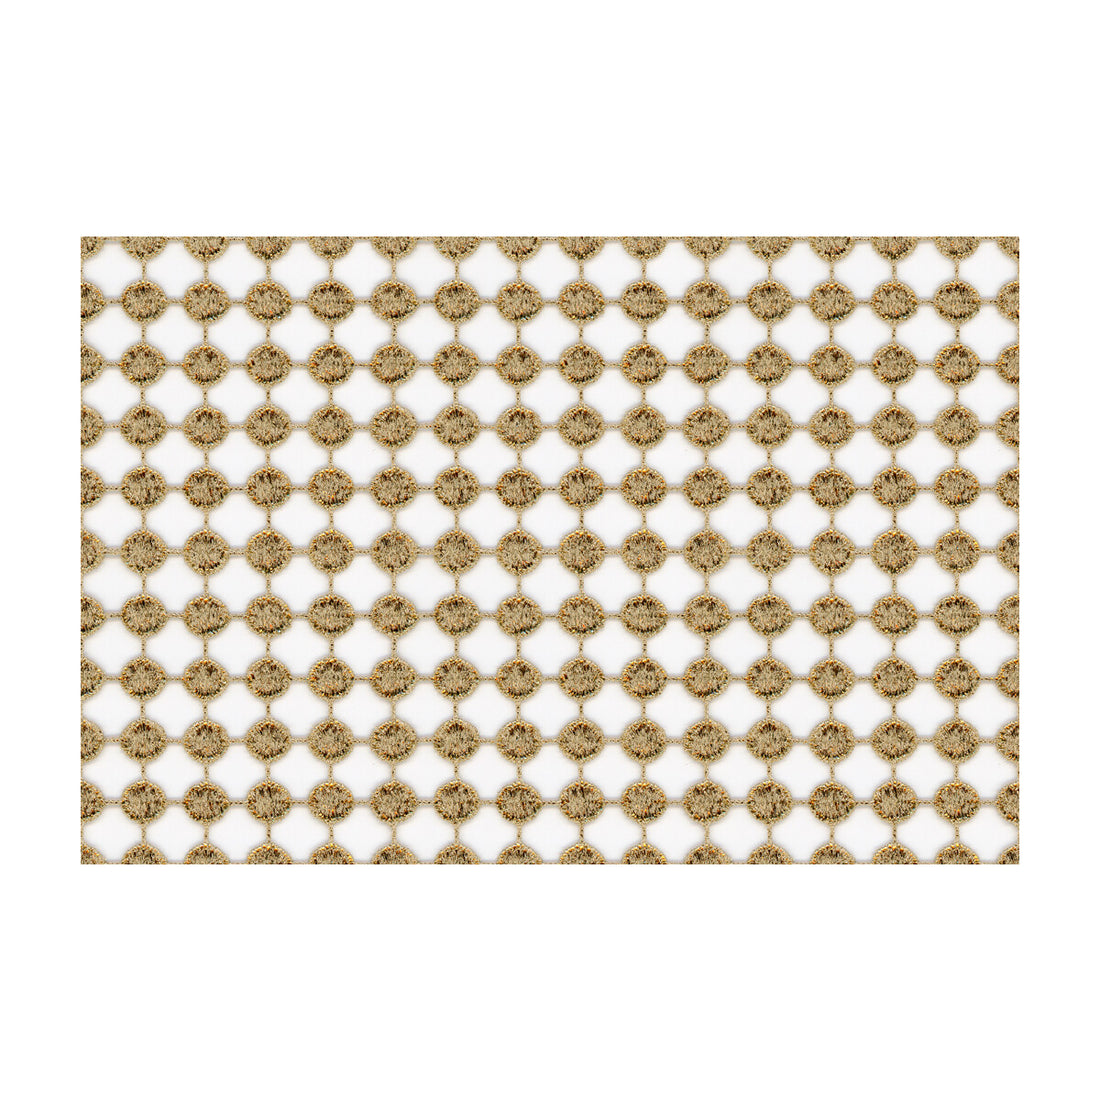 Party Favors fabric in old gold color - pattern 3987.4.0 - by Kravet Couture in the Modern Luxe collection